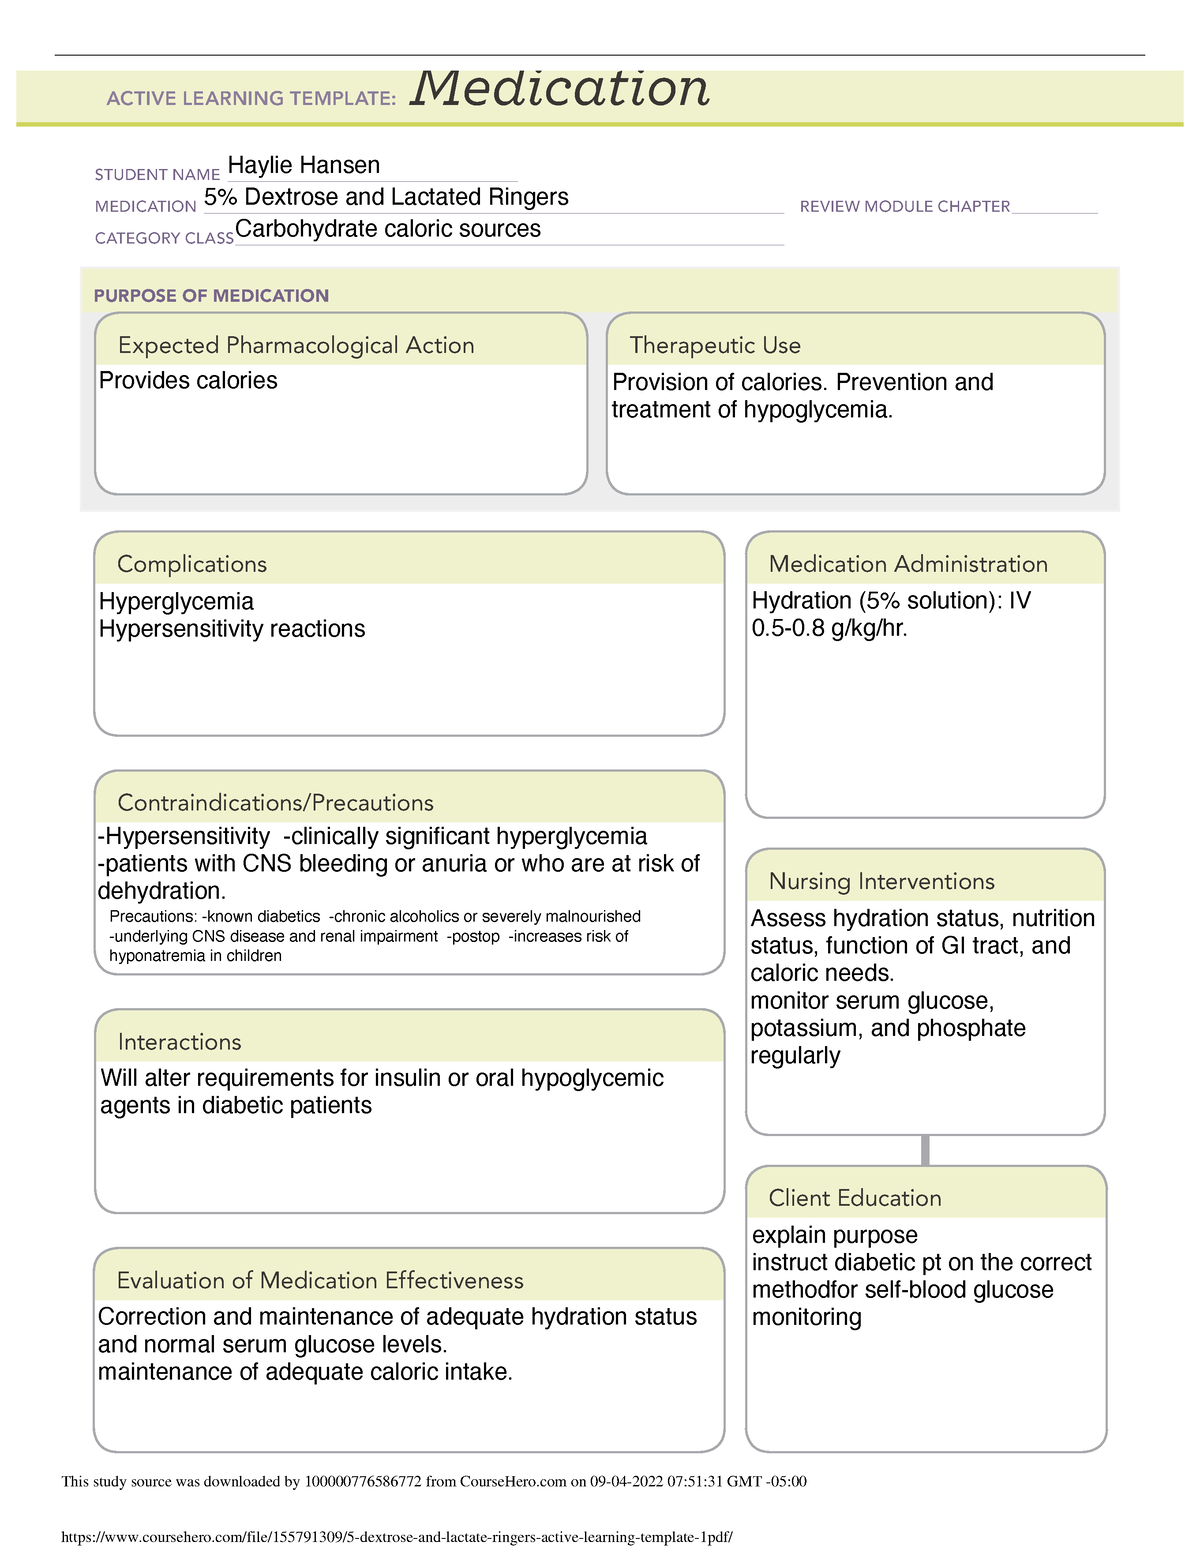 5-dextrose-and-lactate-ringers-active-learning-template-1-medication